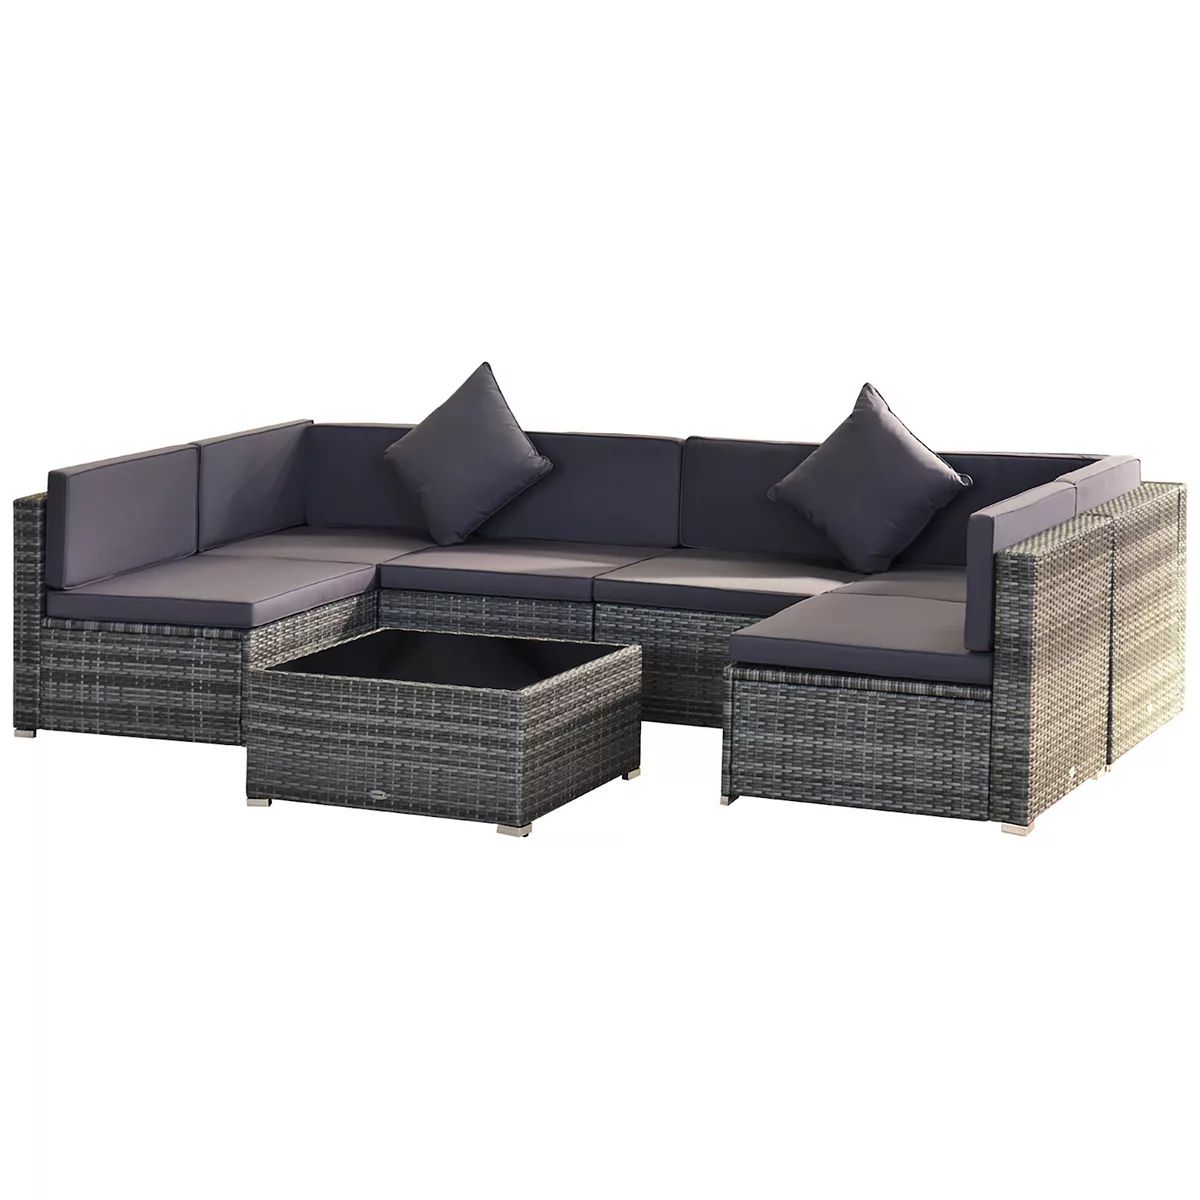 Outsunny 7 Piece Outdoor Patio Furniture Set with Modern Rattan Wicker | Kohl's